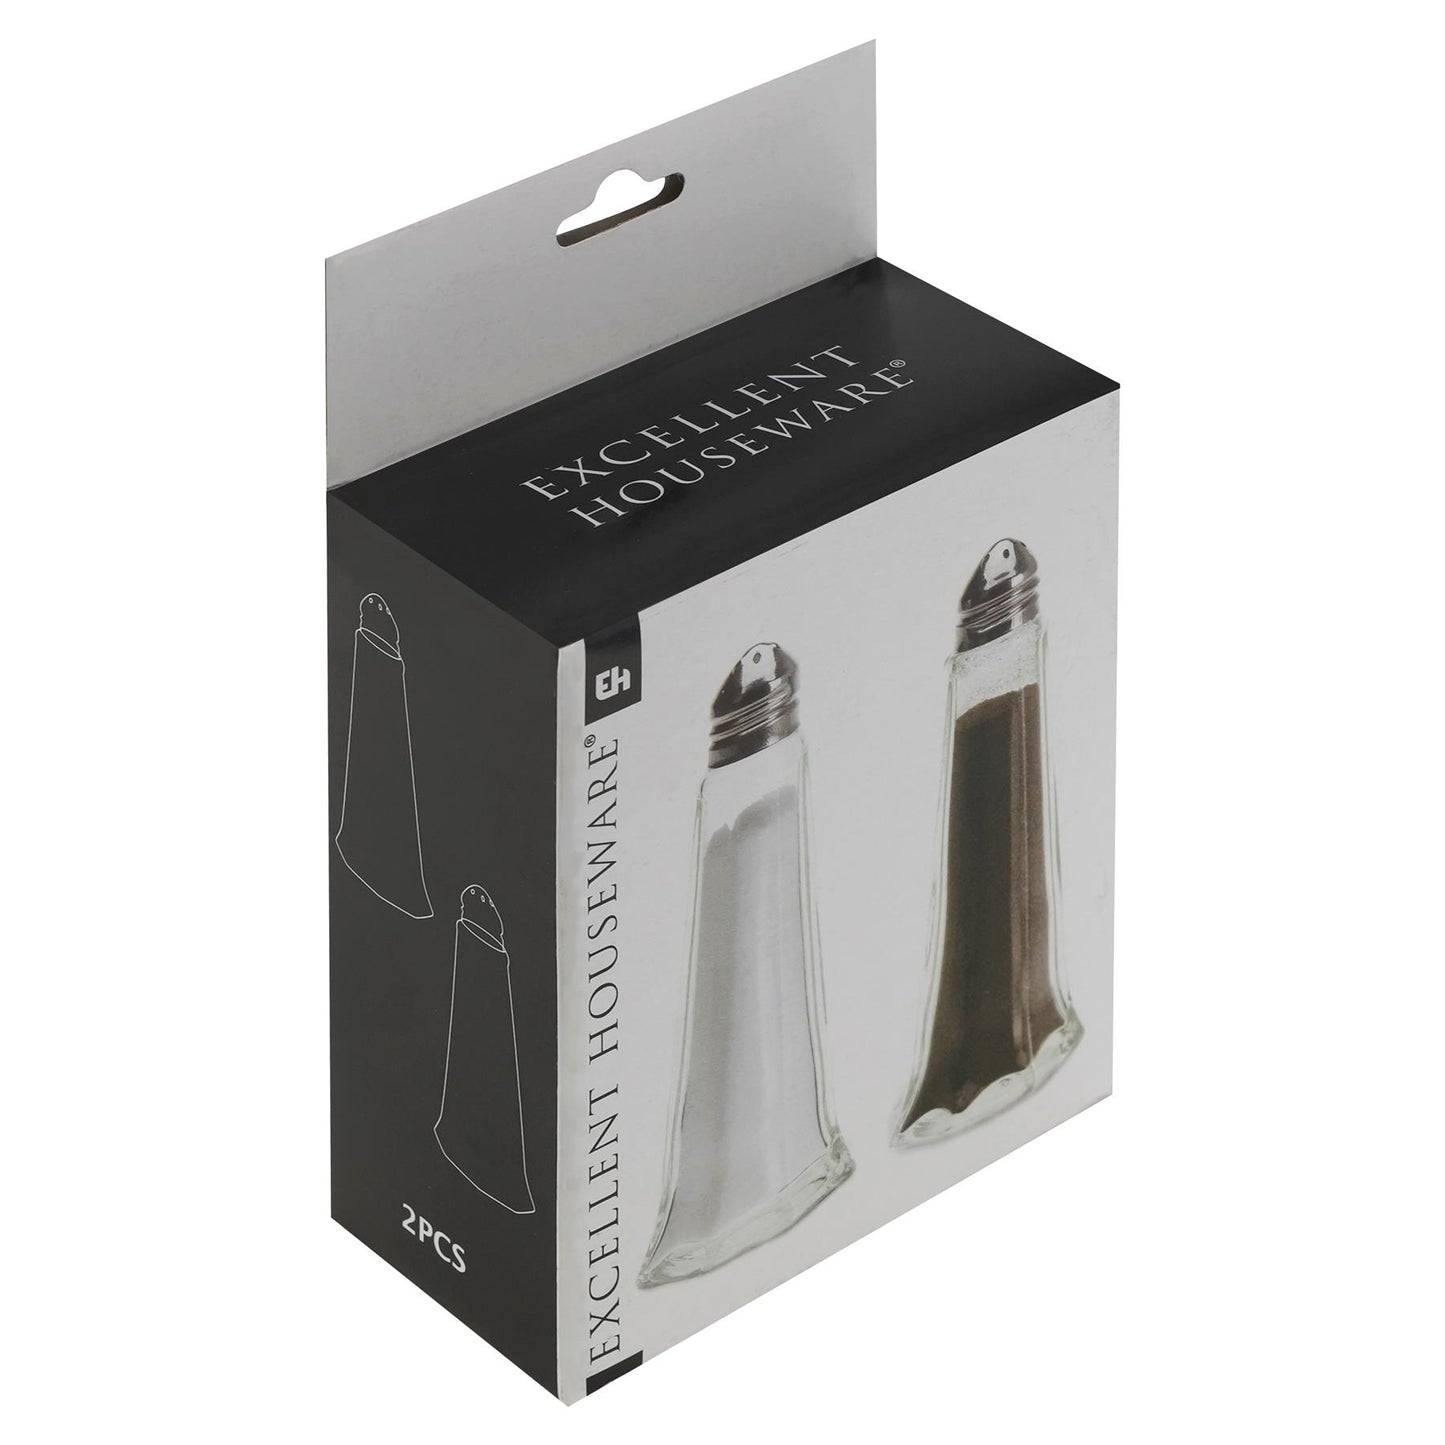 Classic Style Salt And Pepper Shakers - Pack Of 12 by Geezy - UKBuyZone